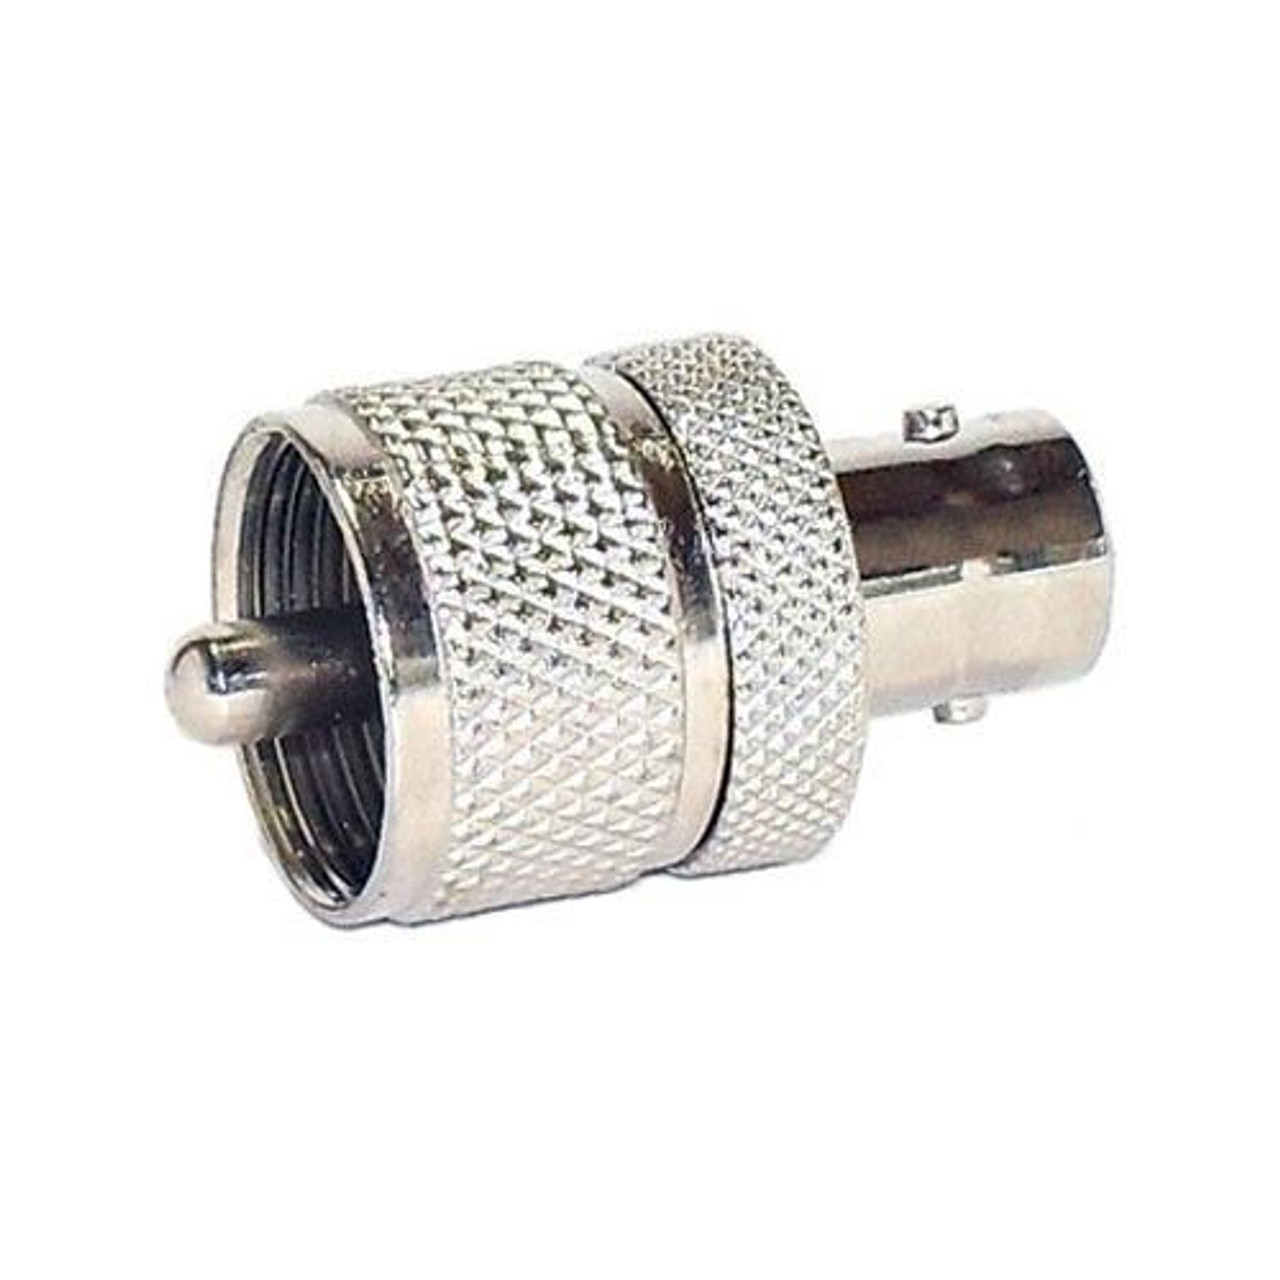 Steren 200-195 BNC Female Jack to UHF Male Plug Adapter Connector UHF Plug to BNC Jack Commercial Grade Nickel Plated with Delrin Insulator TV Antenna Satellite Components Plug, Part # 200195